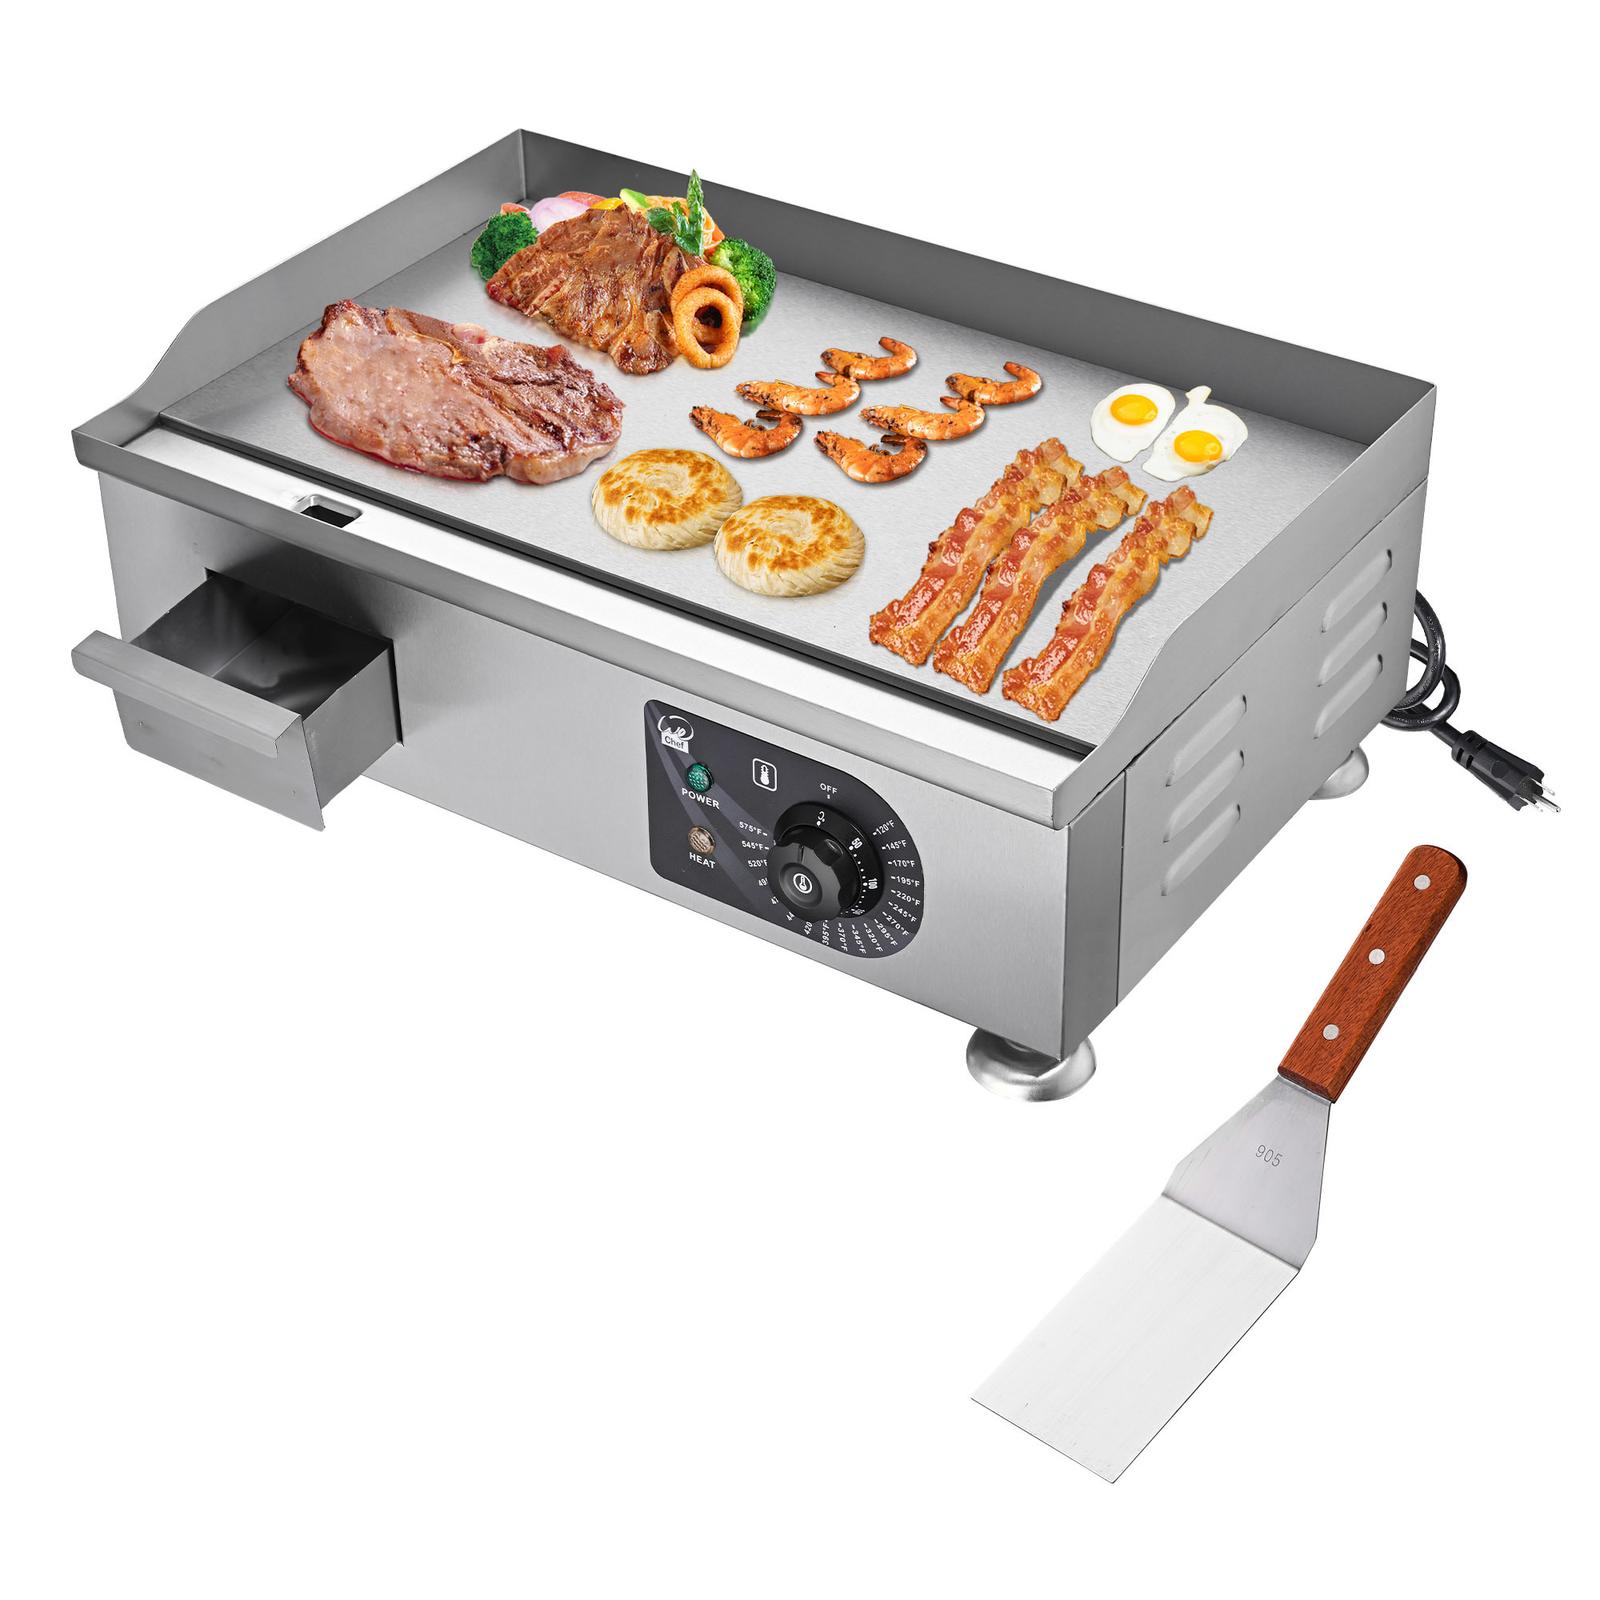 Electric griddle with various foods and spatula